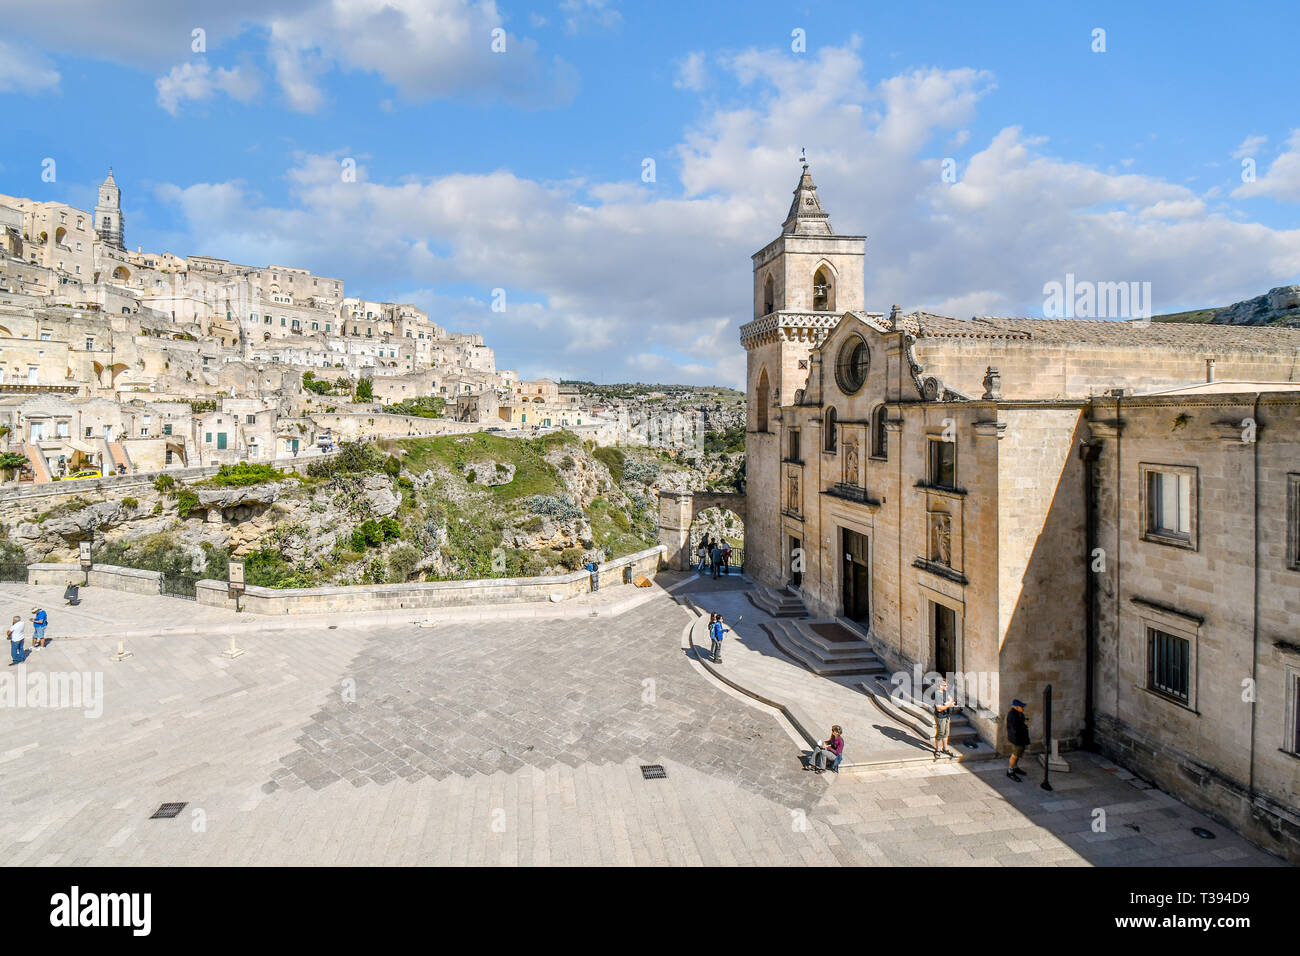 Tourists enjoy a summer day on the piazza of the Church of San Pietro Caveoso with the medieval hillside village and ancient sassi in view Stock Photo